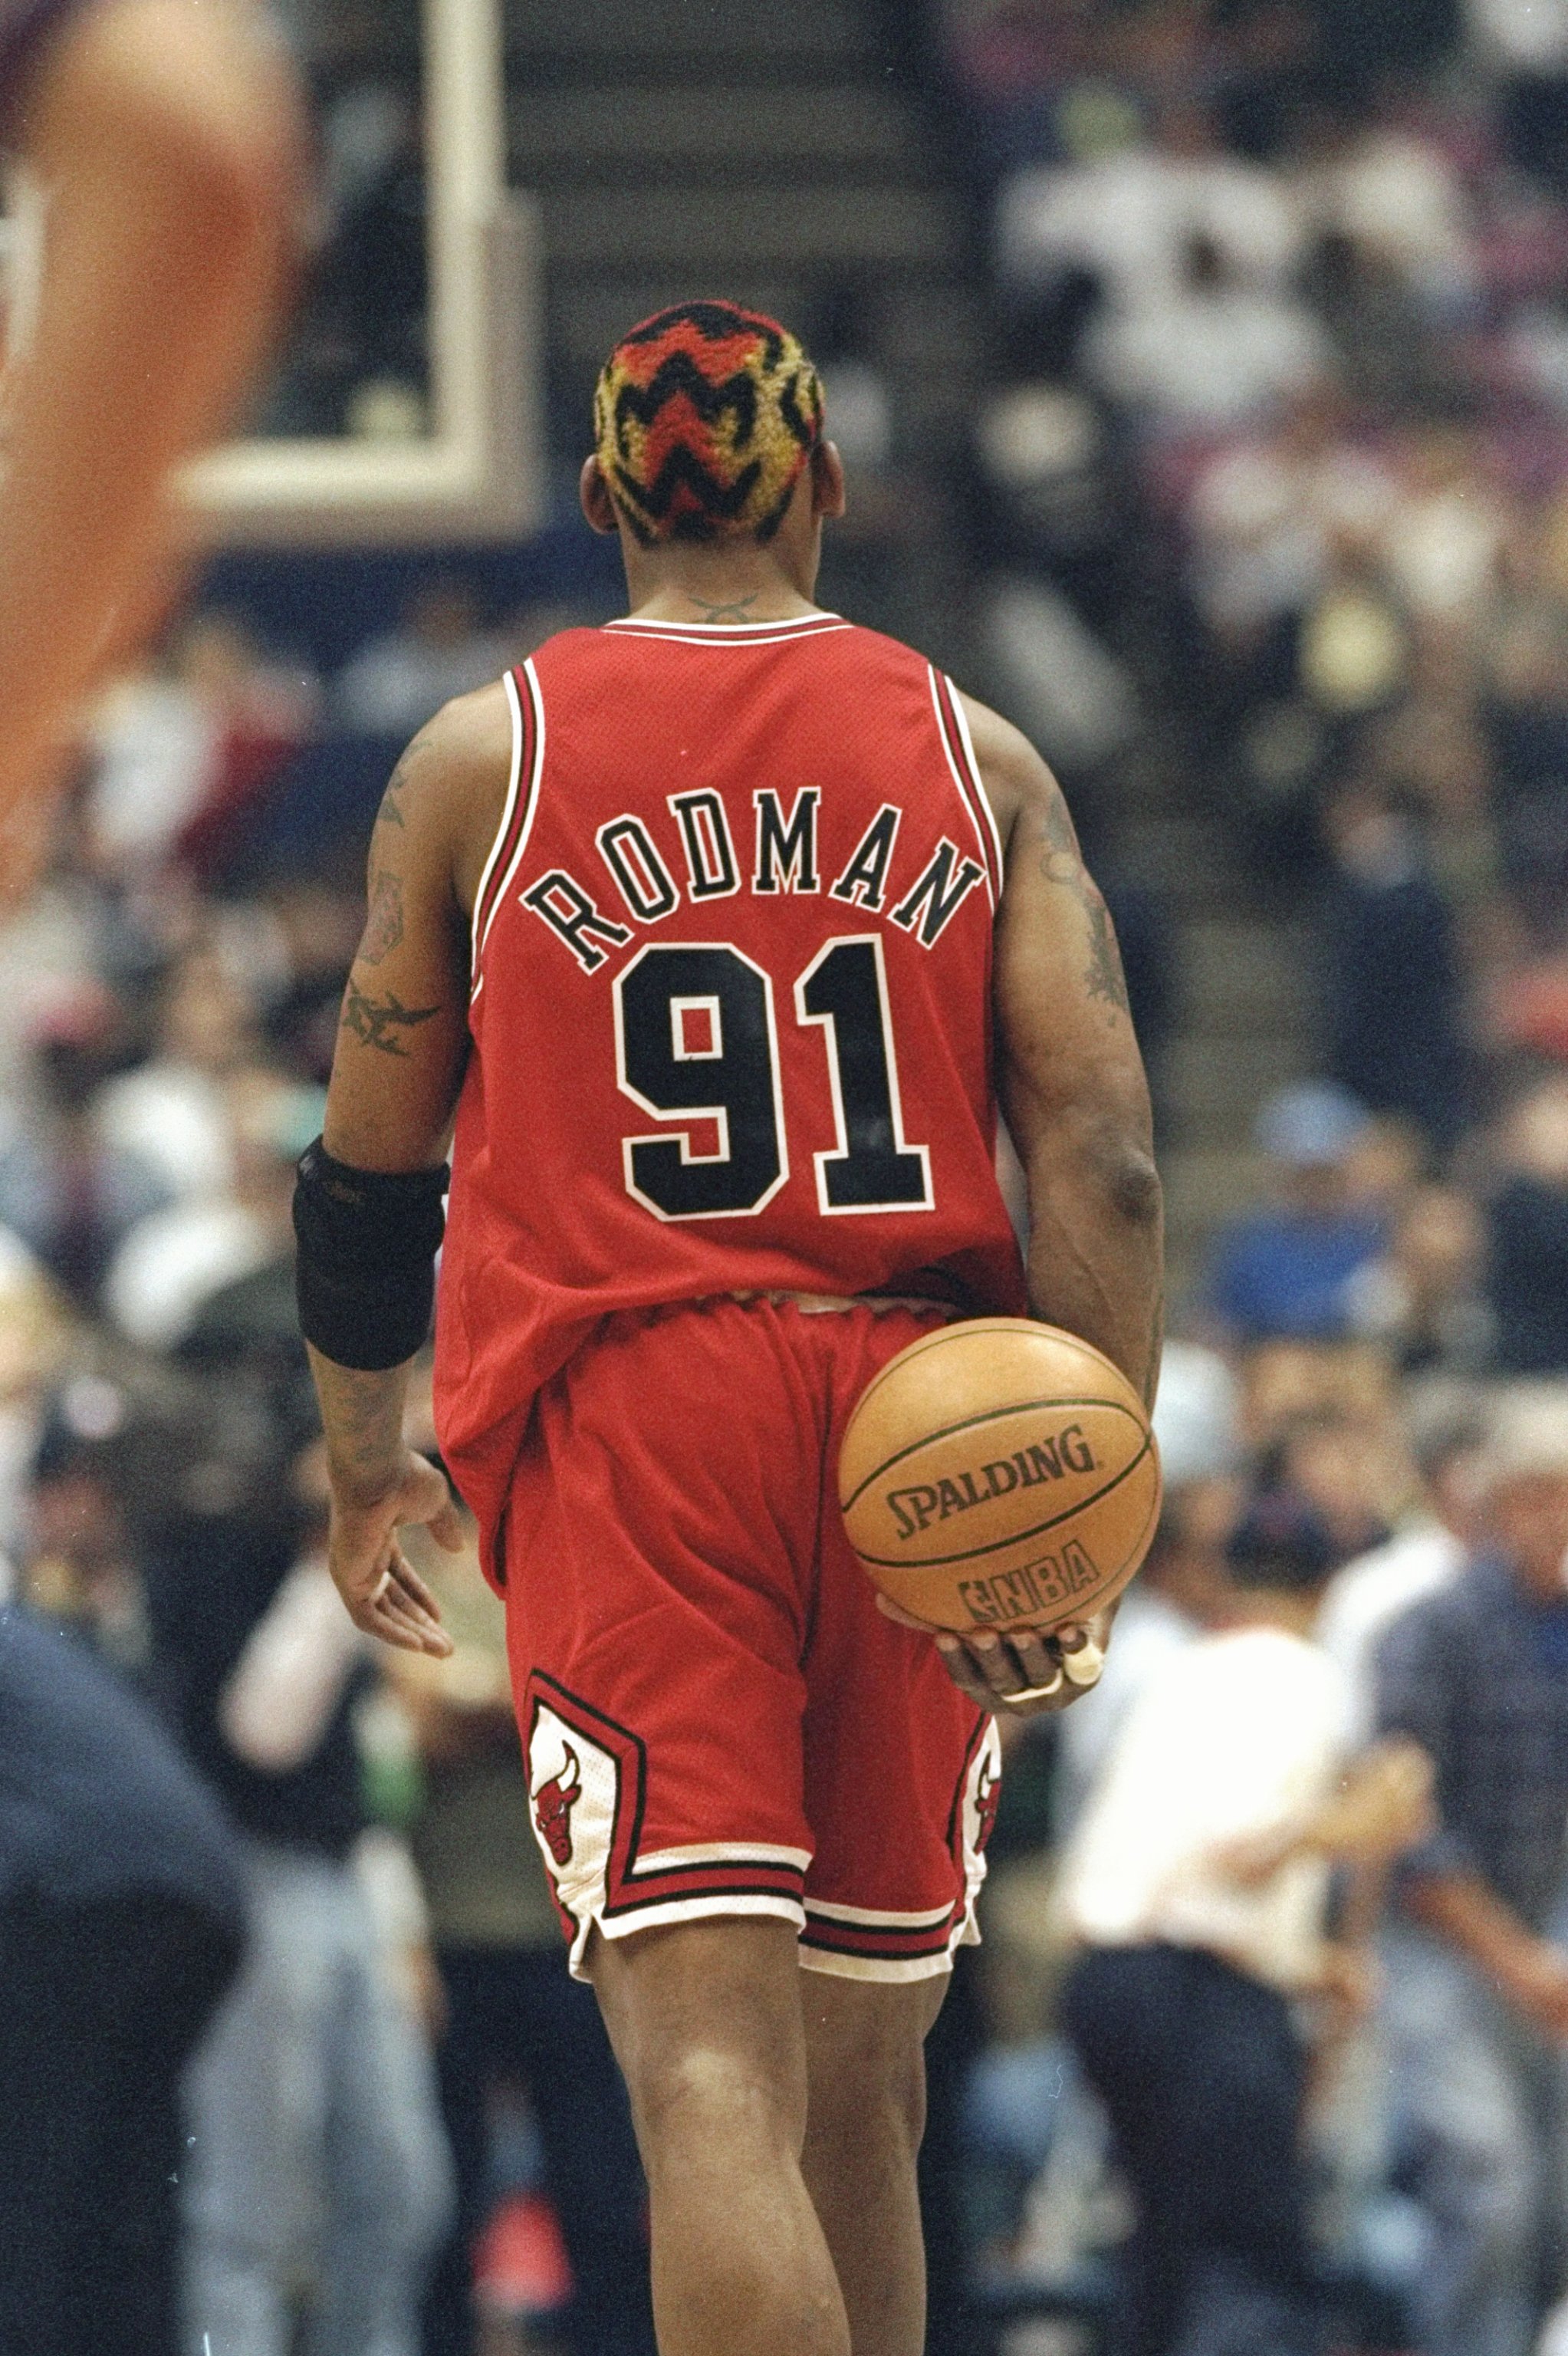 29 Apr 1998: Dennis Rodman #91 of the Chicago Bulls in action during the NBA Playoffs round 3 game against the New Jersey Nets at the Continental Airlines Arena in East Rutherford, New Jersey. The Bulls defeated the Nets 116-101.